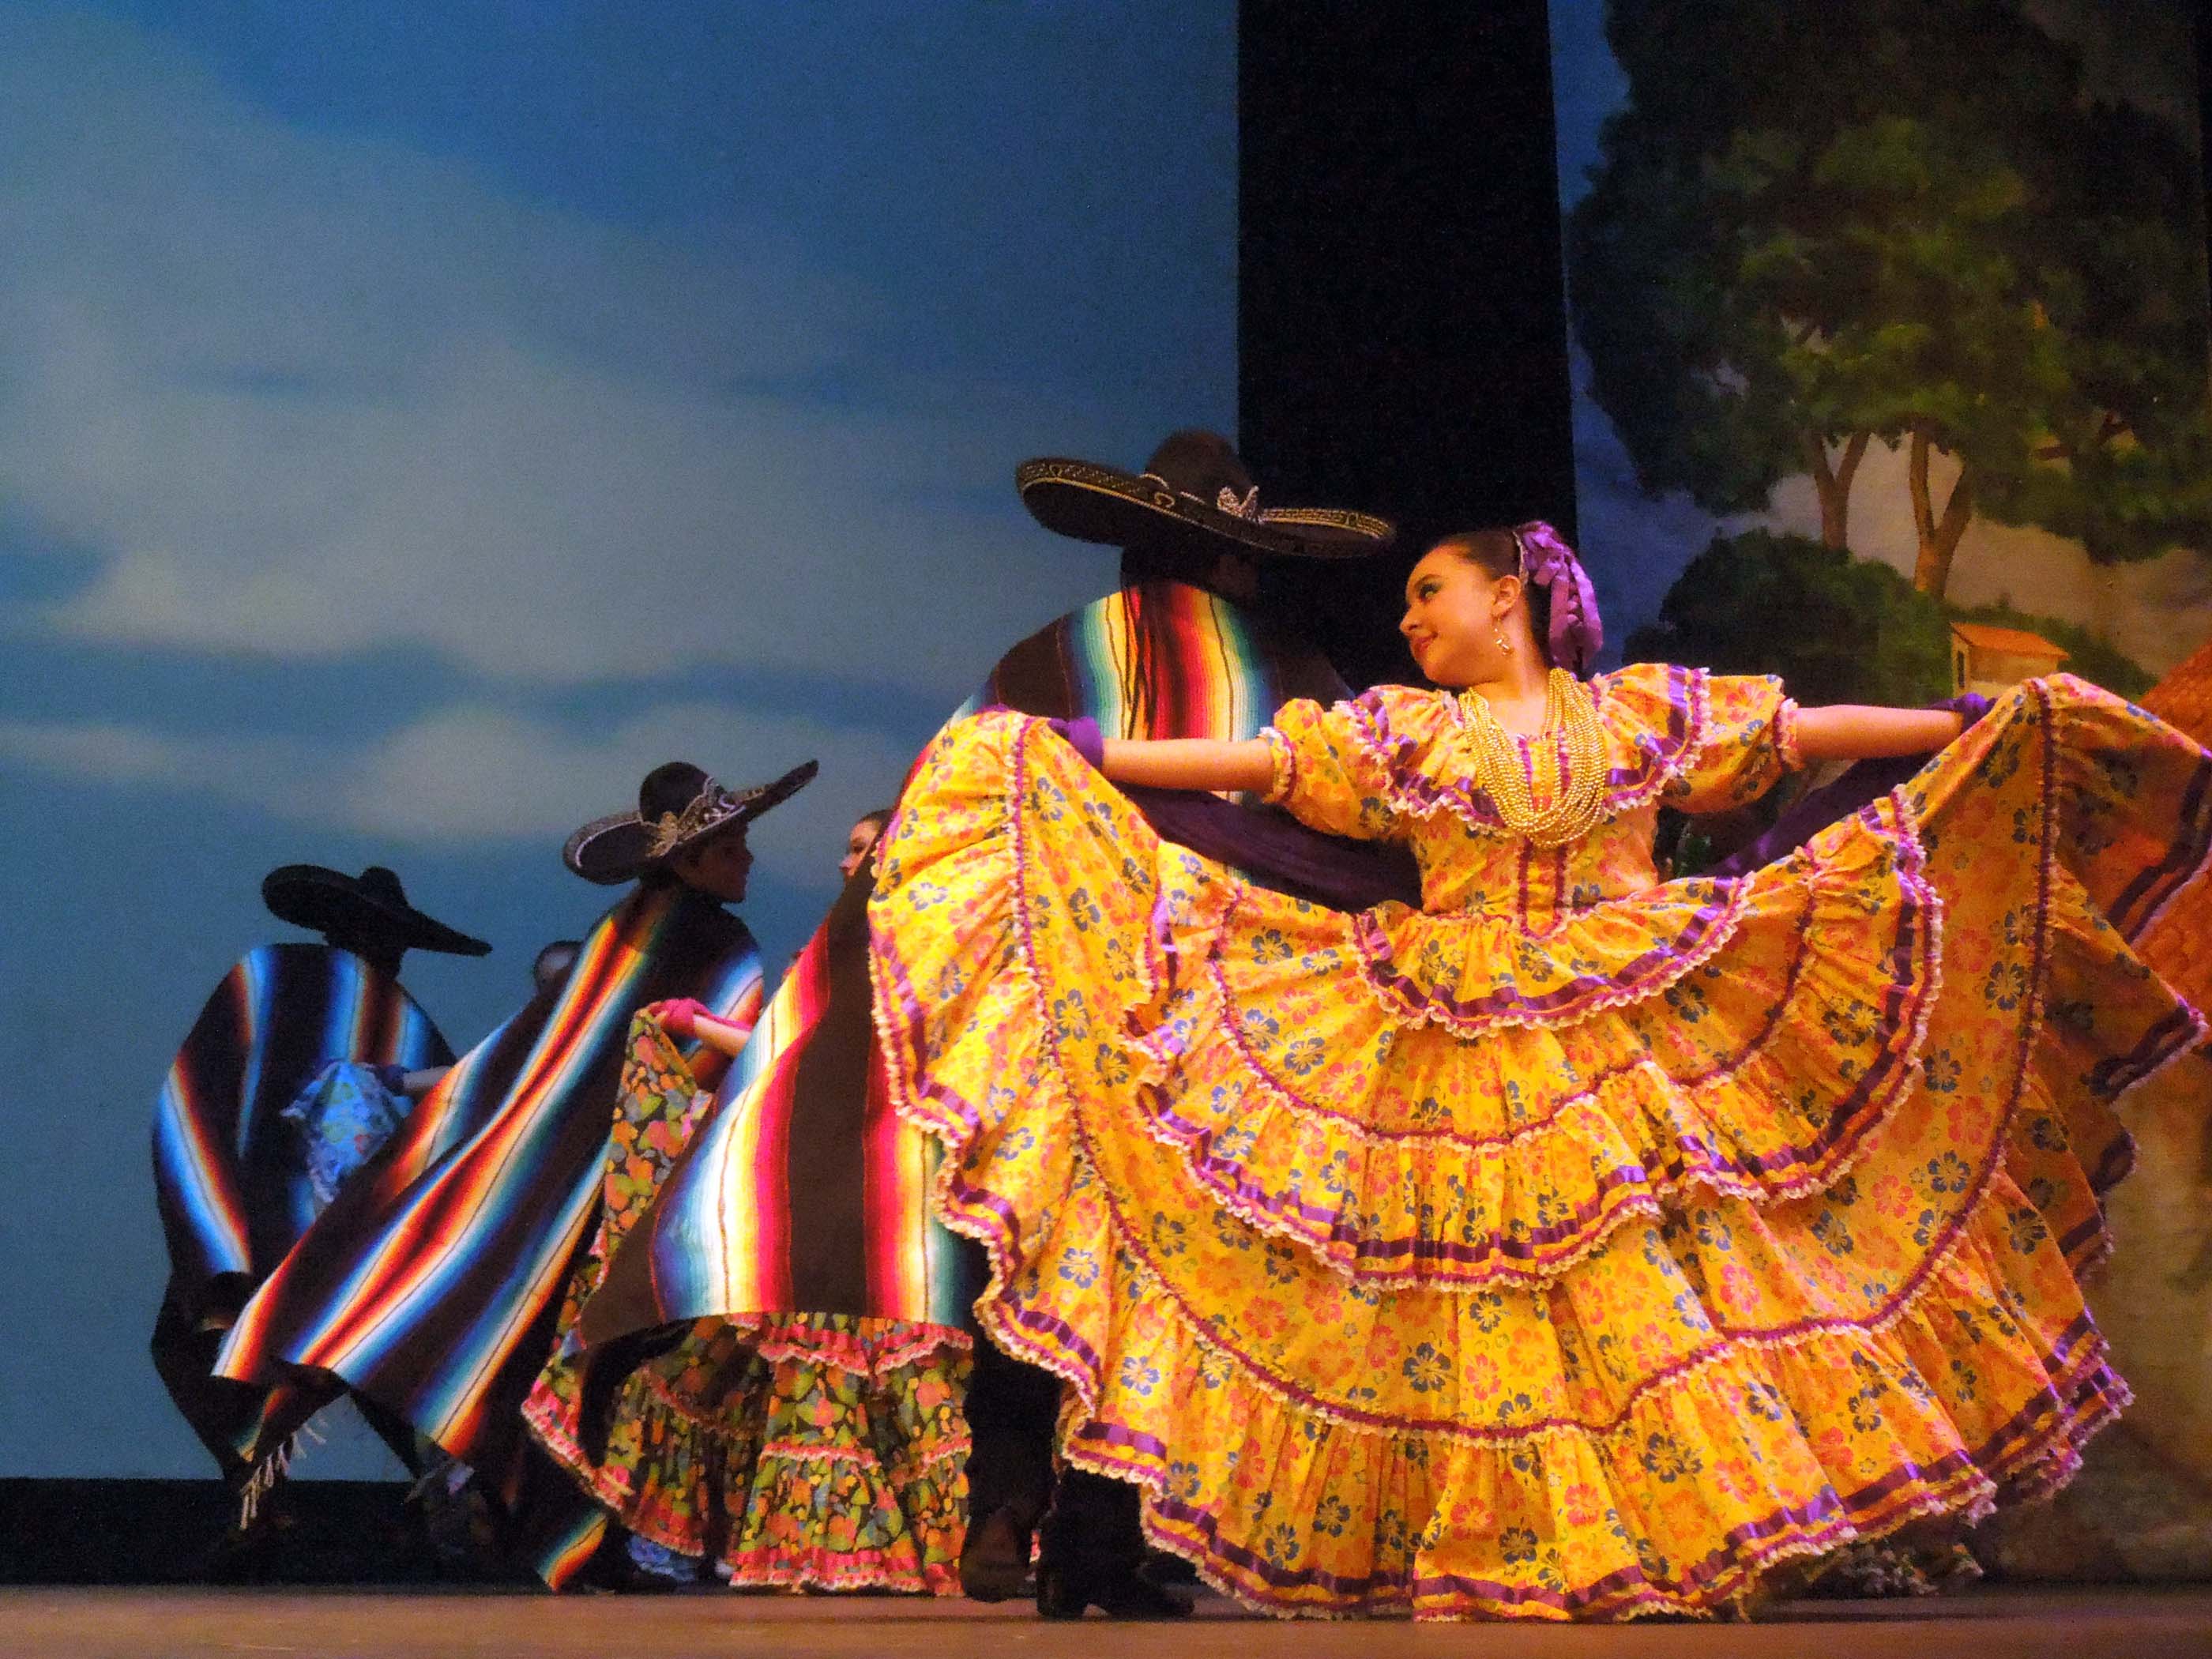 Women in swirling skirts and men with sombreros and colorful ponchos dance onstage